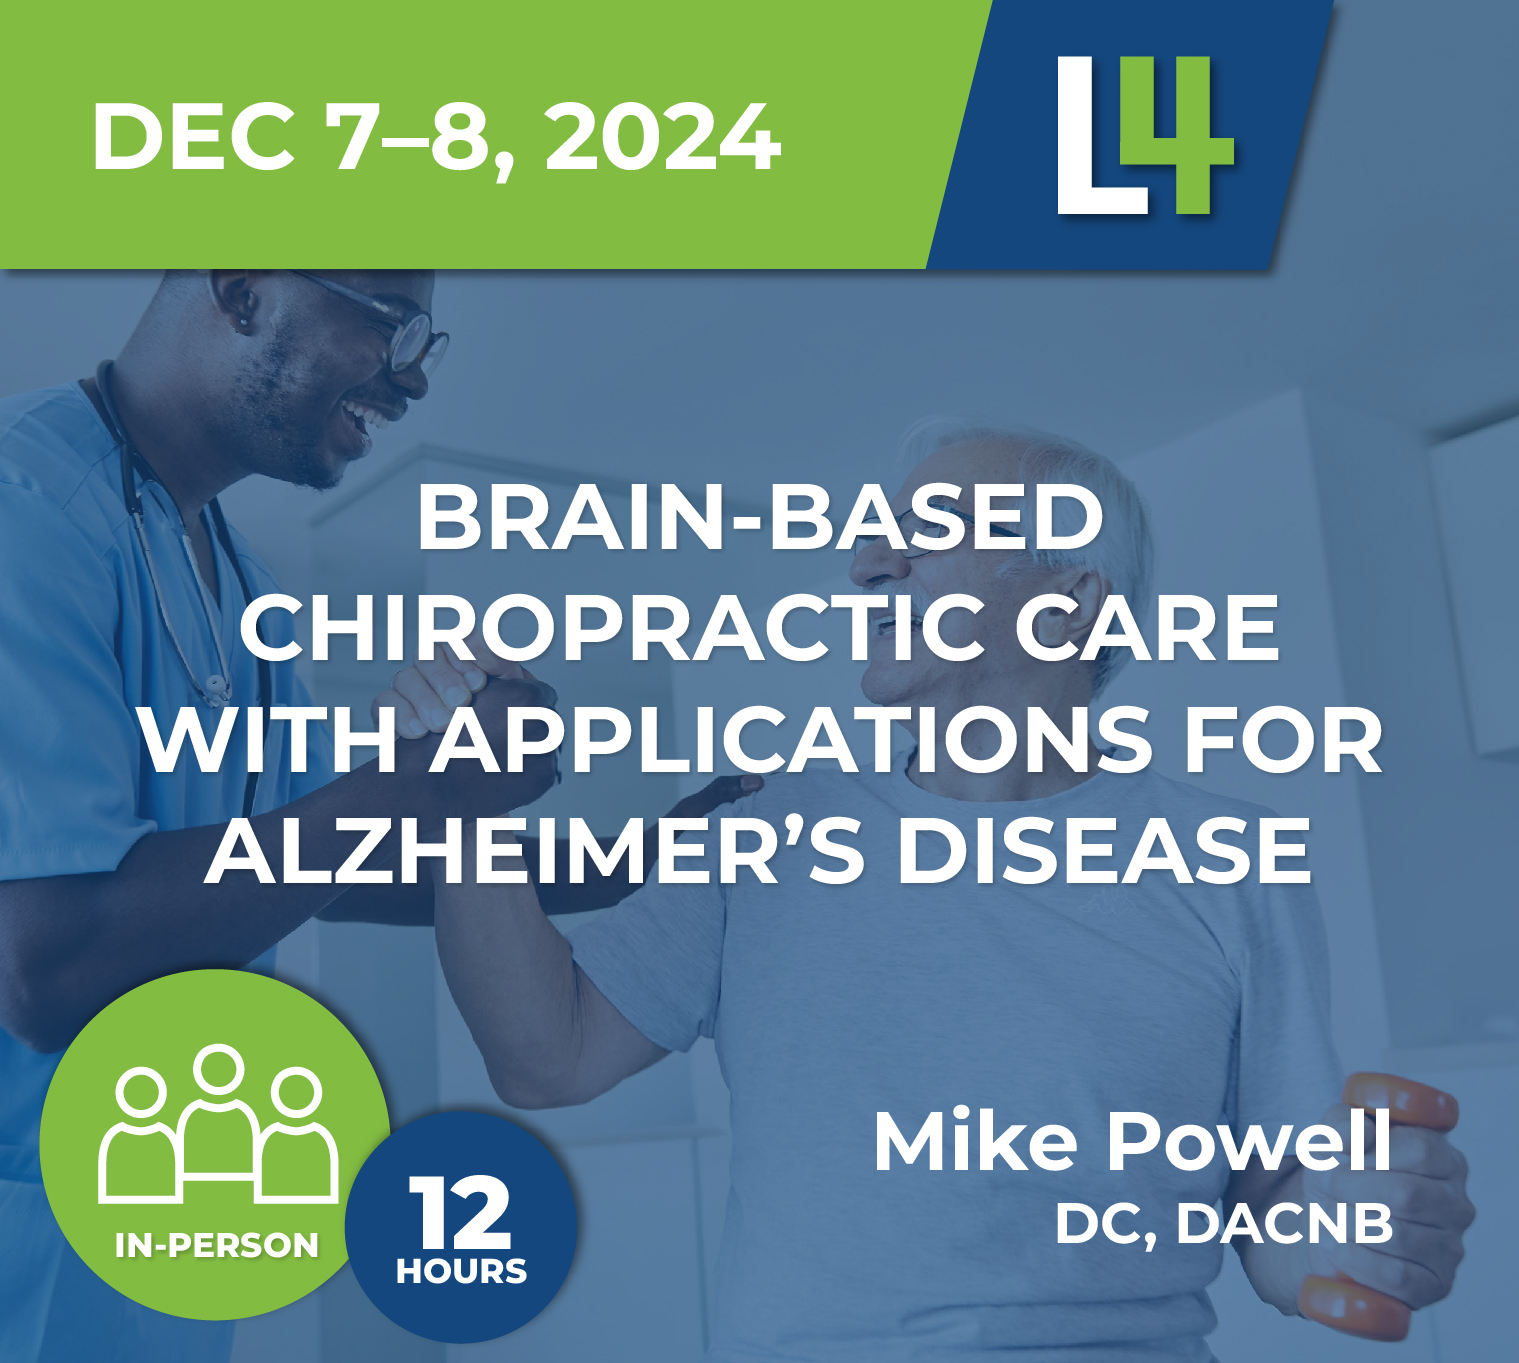 Brain-based Chiropractic Care with Applications for Alzheimer's Disease